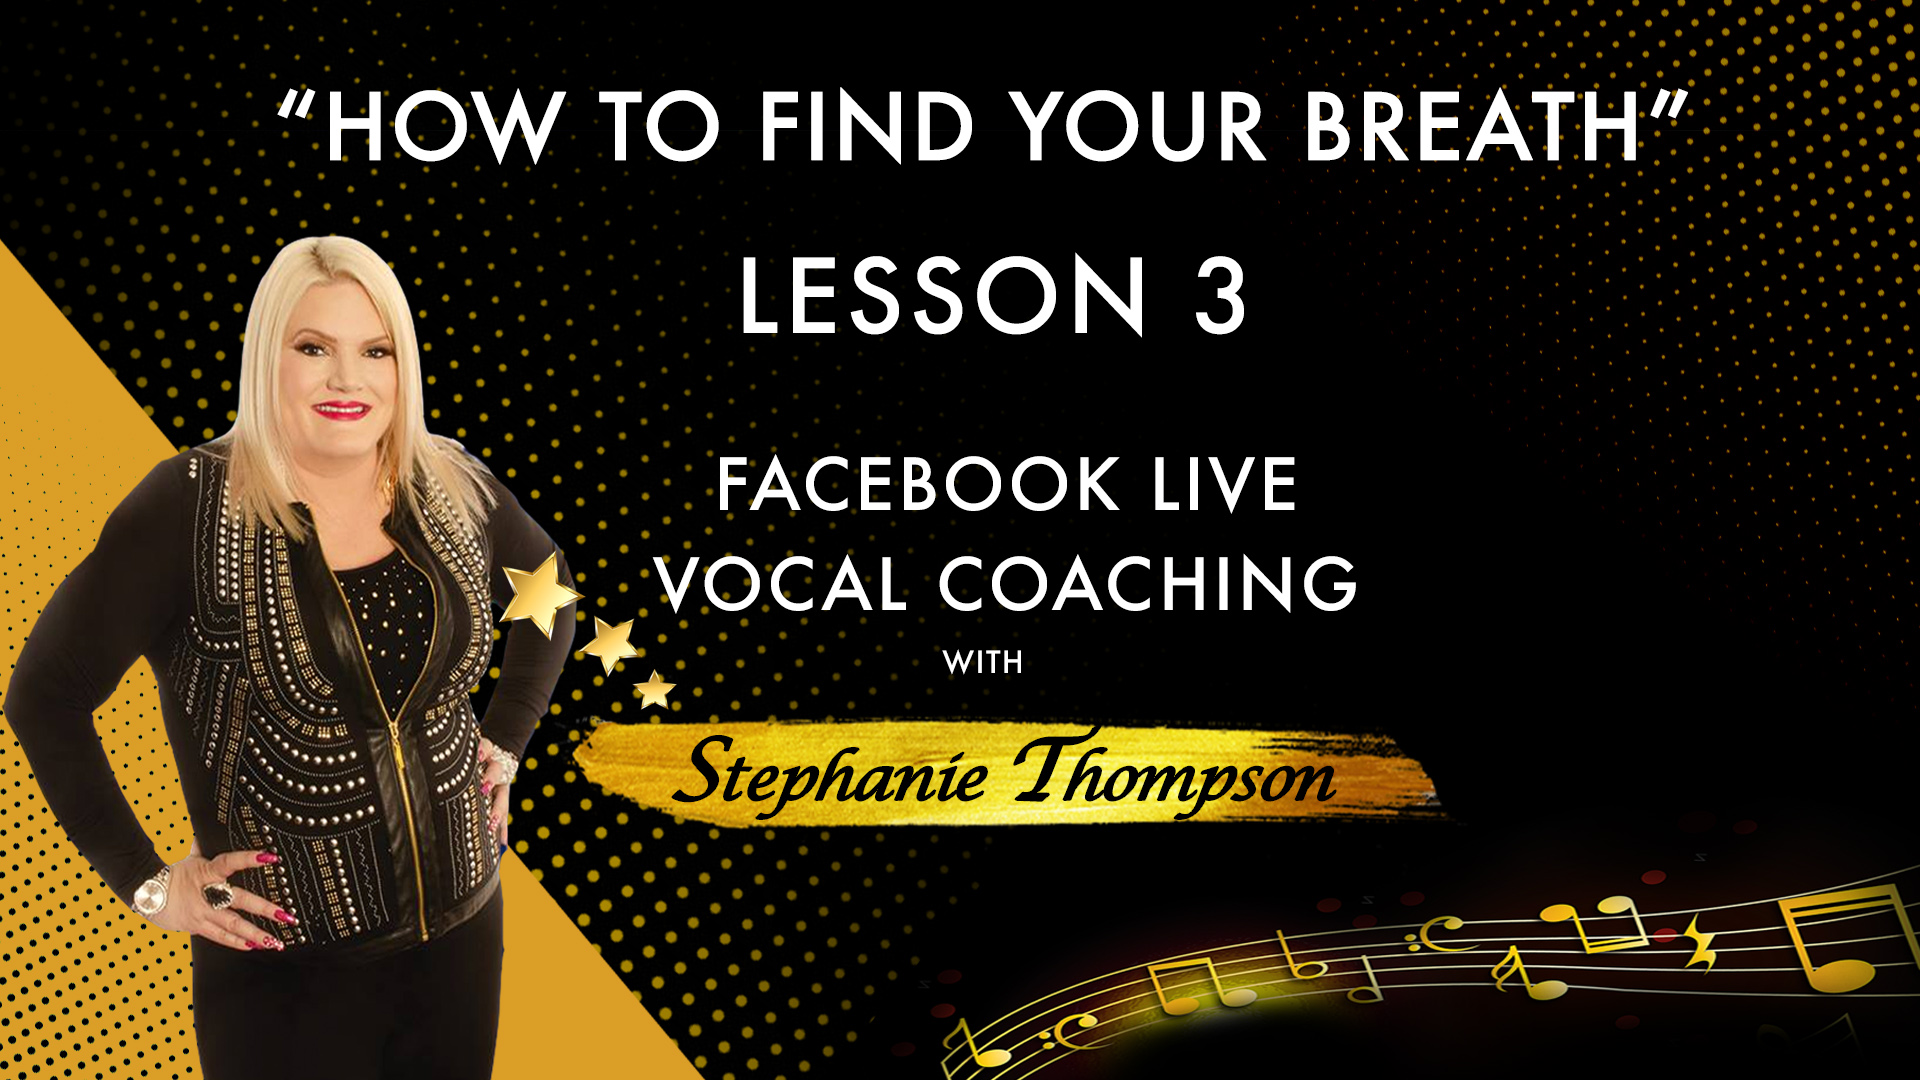 Lesson 3 - How to Find Your Breath